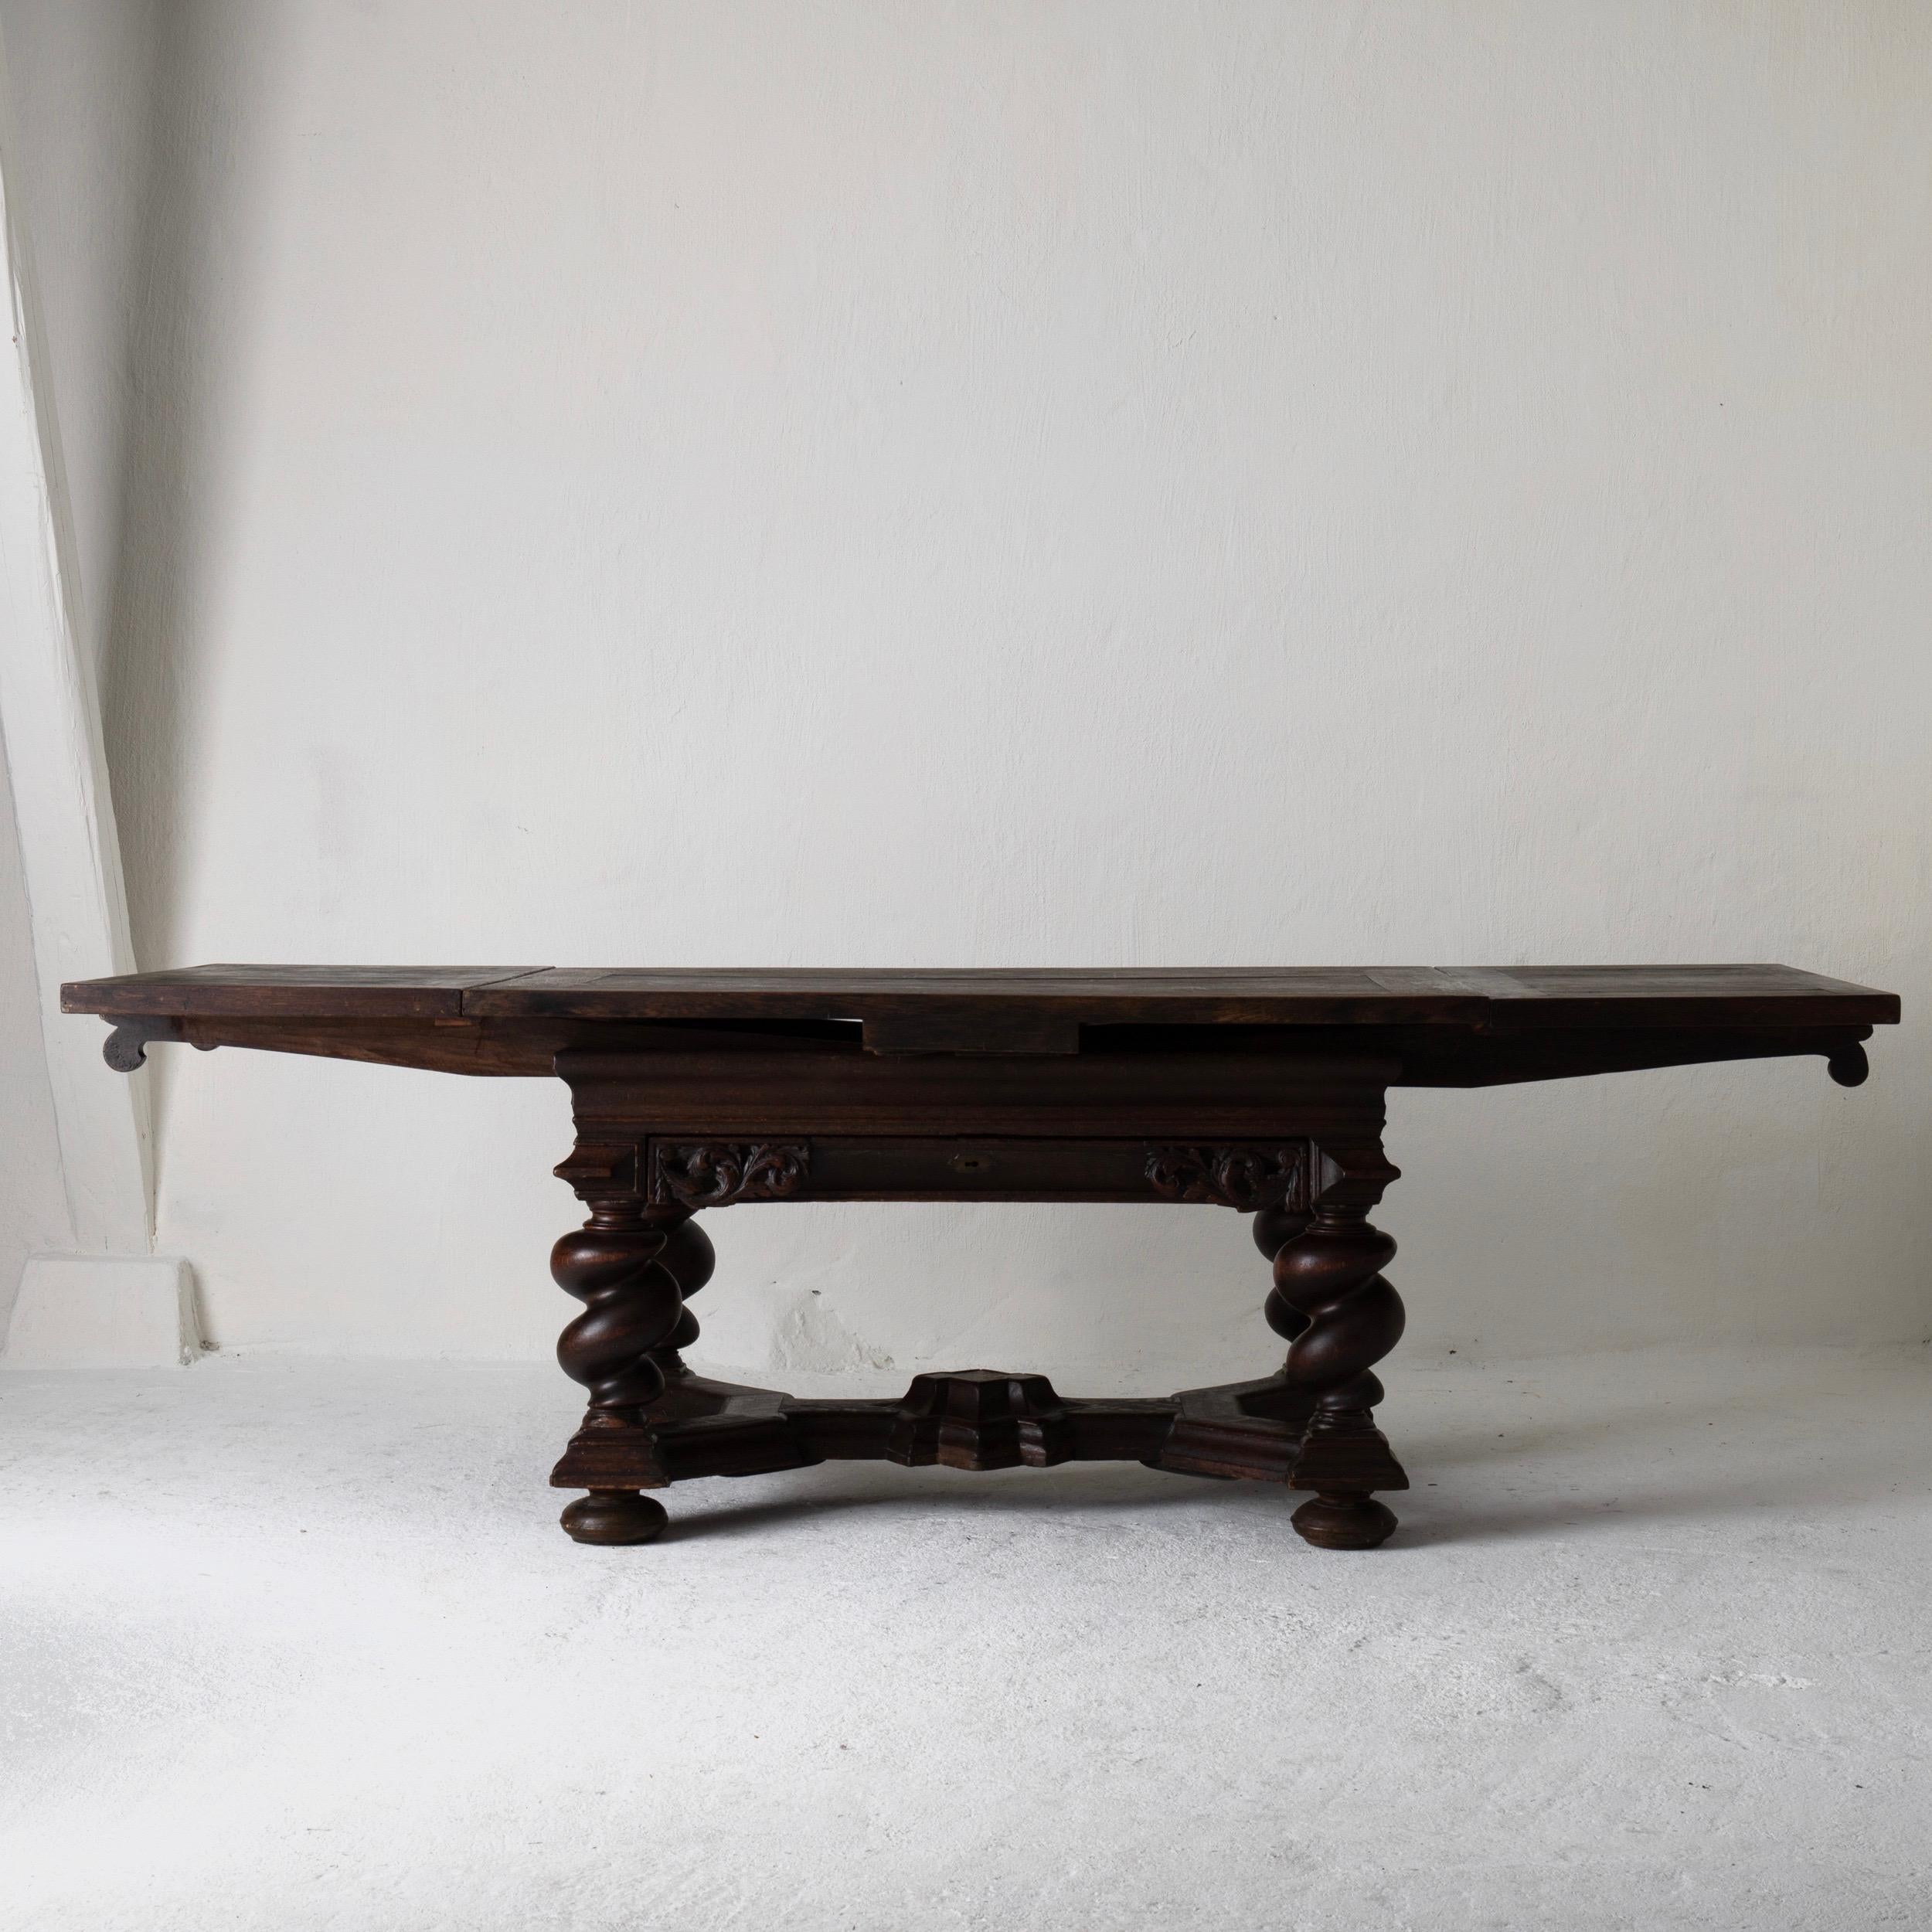 Table made in Sweden during the Baroque period 1650-1750. Made in dark stained oak. Two extendable leaves a 21.5” each. Base with a wide drawer and foot cross. Beautiful carvings and original locks. Each leaf is 21.5